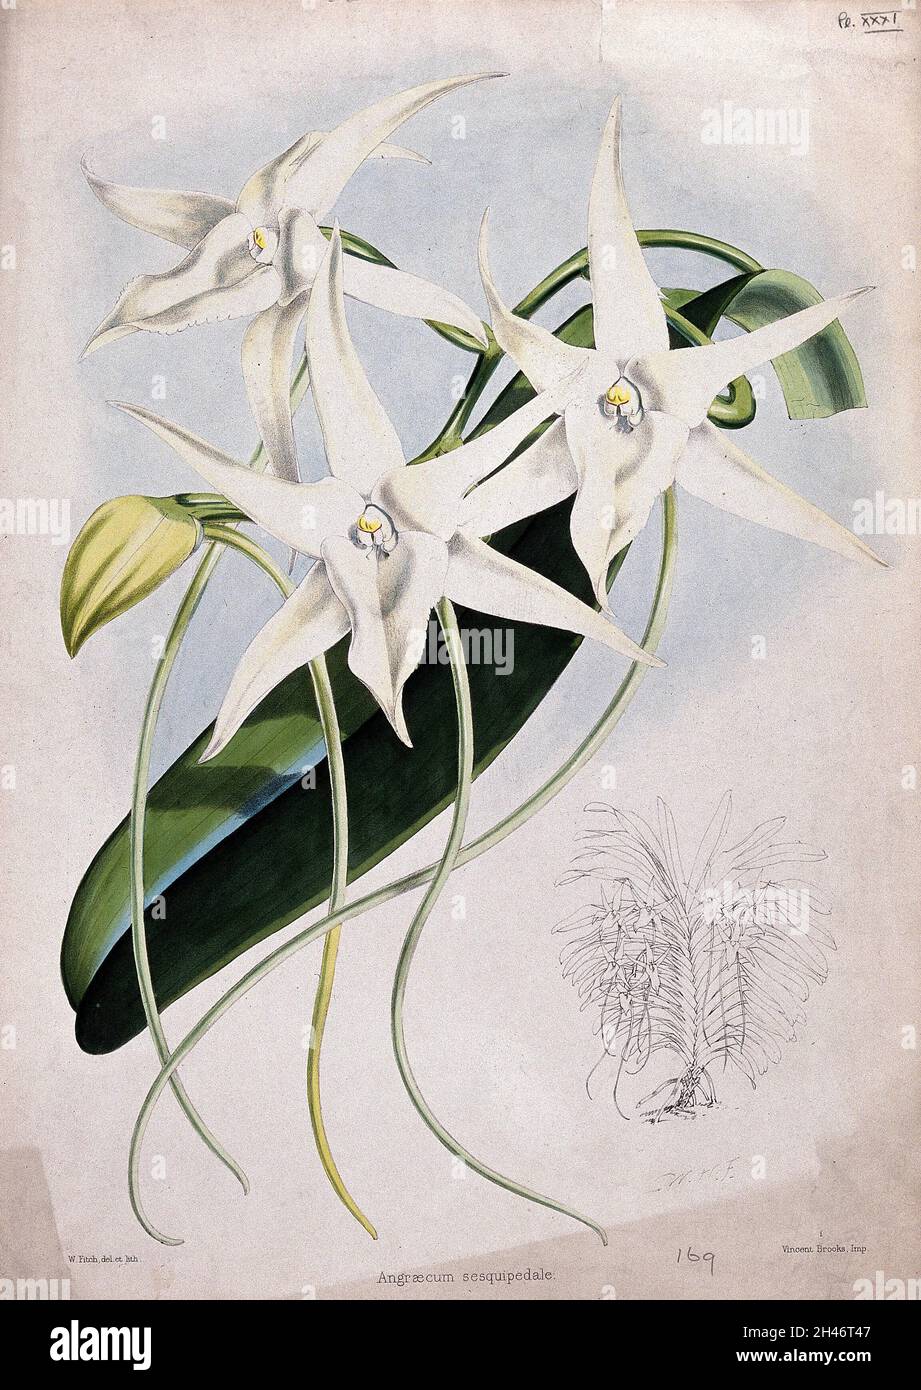 An orchid (Angraecum sesquipedale Thouars): flowers, a leaf and small outline of the whole plant. Coloured lithograph by W. Fitch, c.1862, after himself. Stock Photo